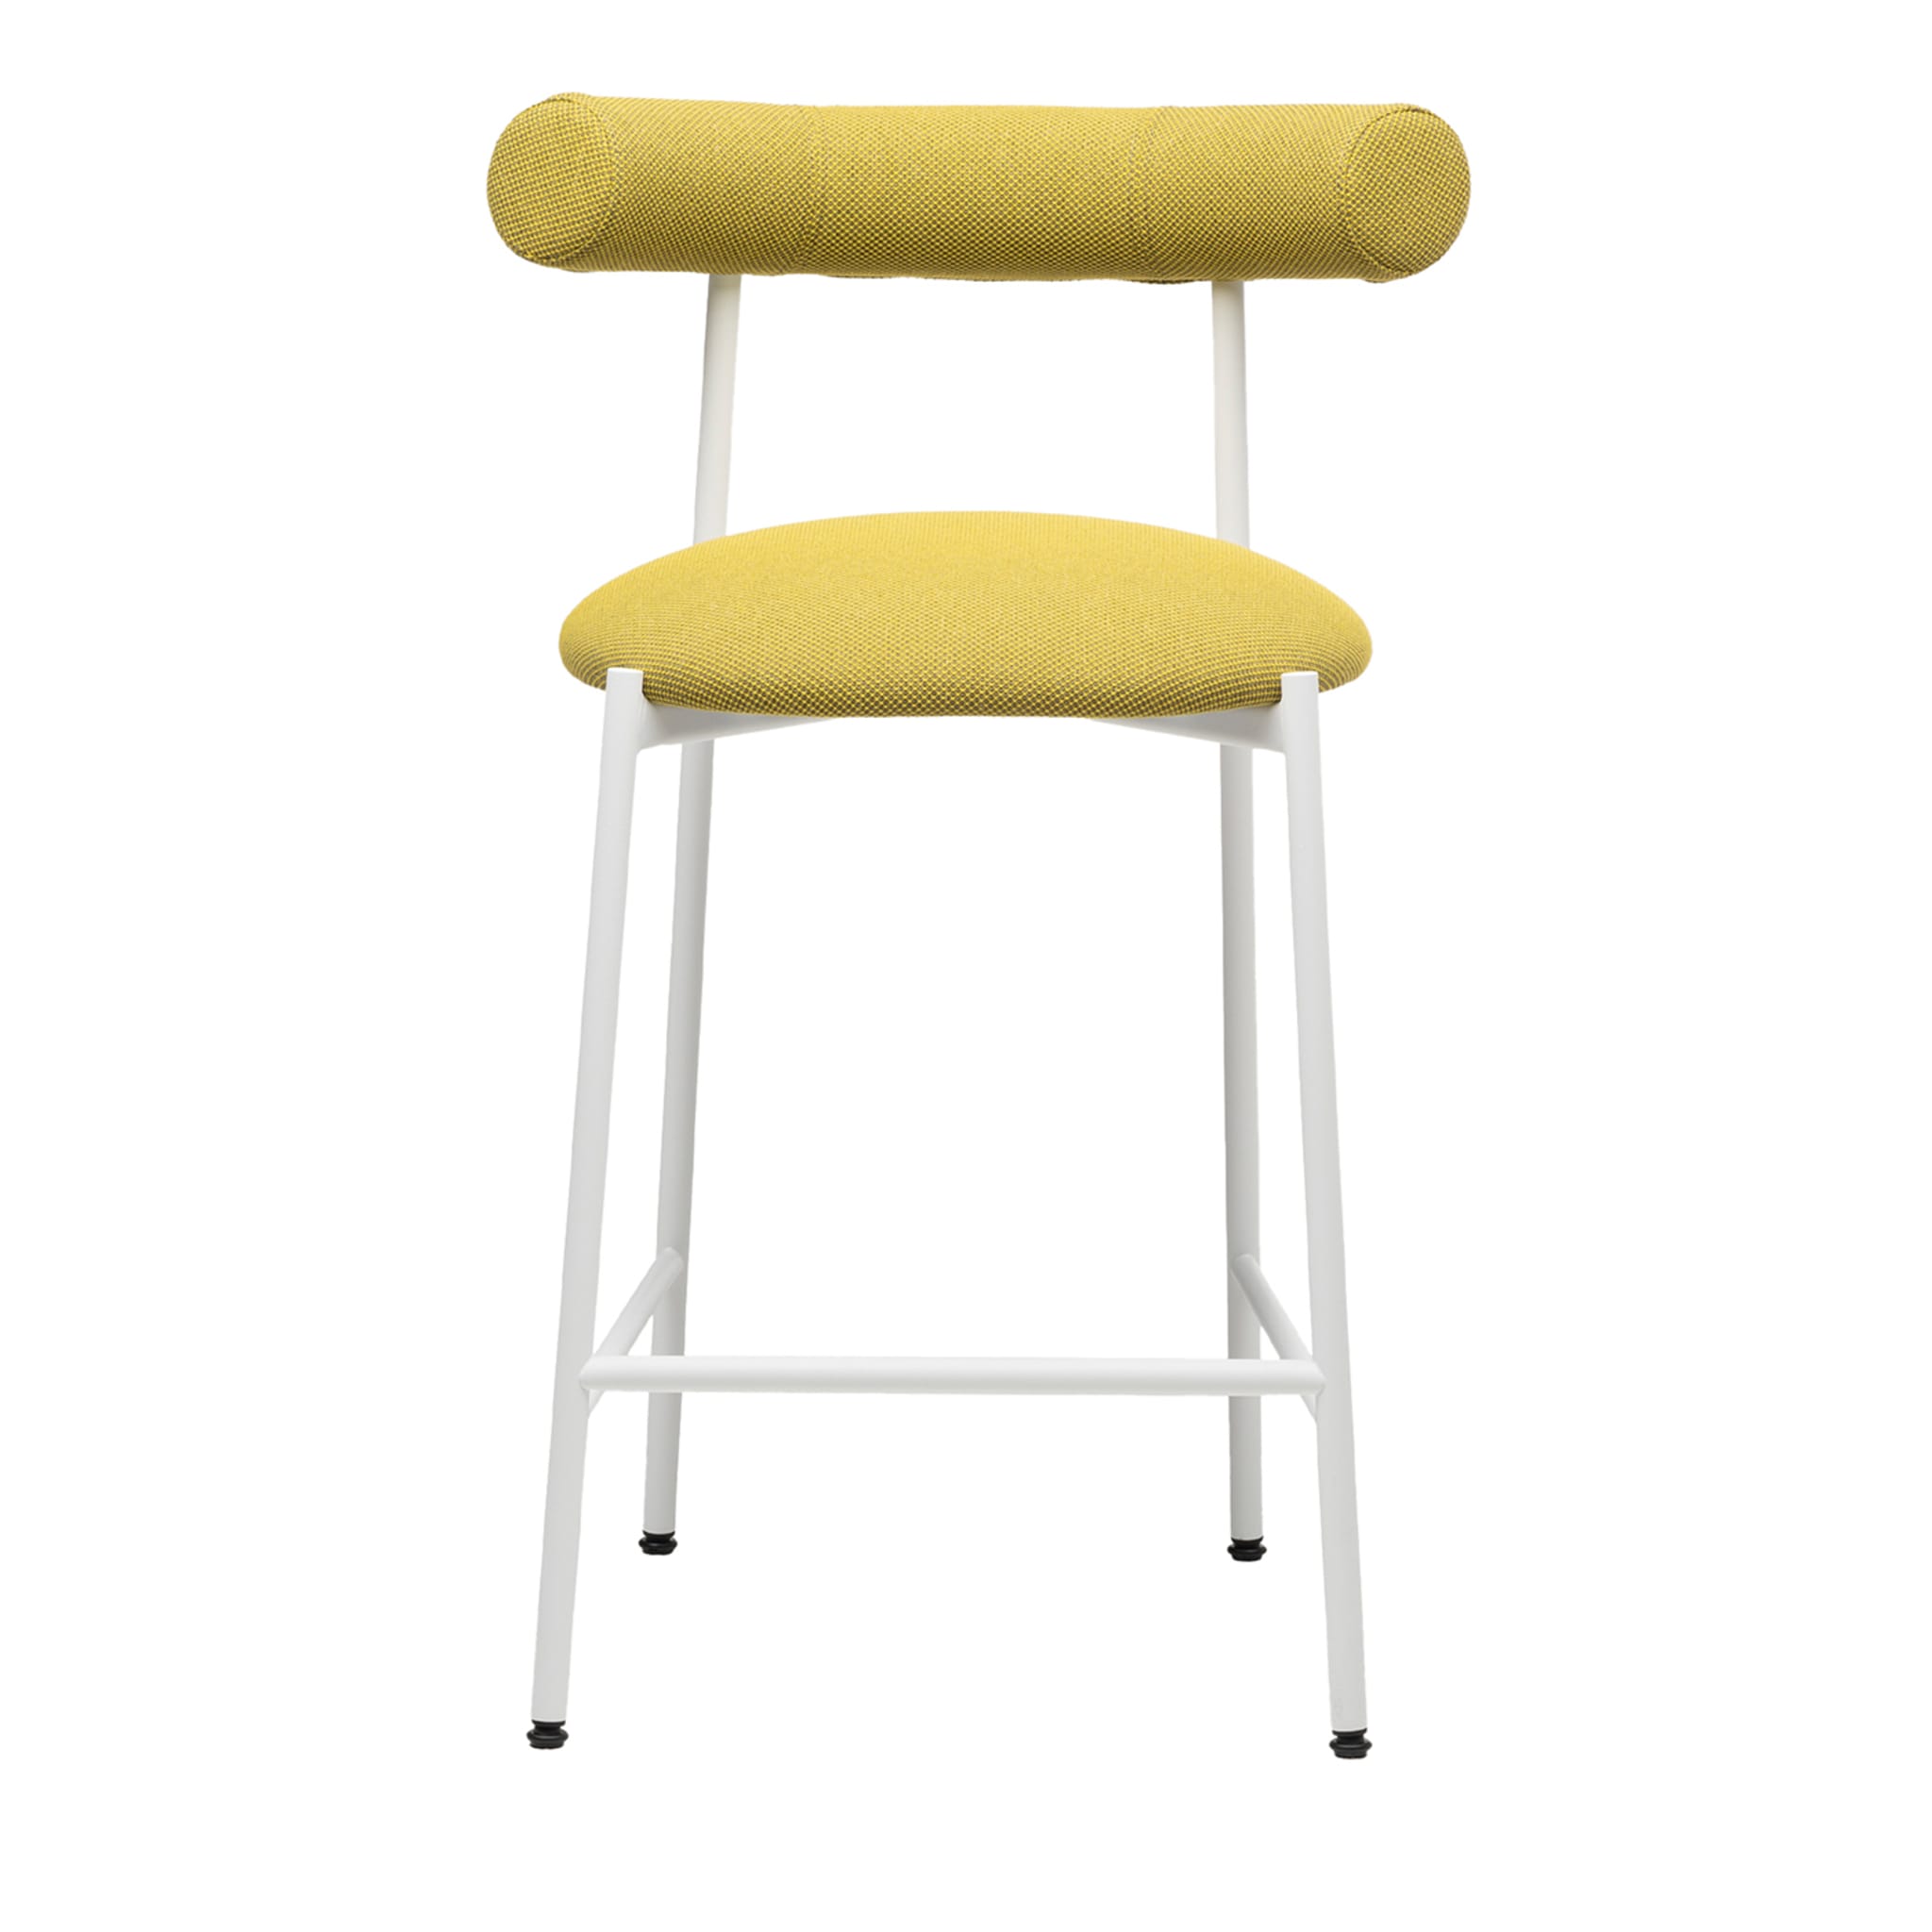 Pampa SG-65 Low Lime-Green & White Stool by Studio Pastina - Main view